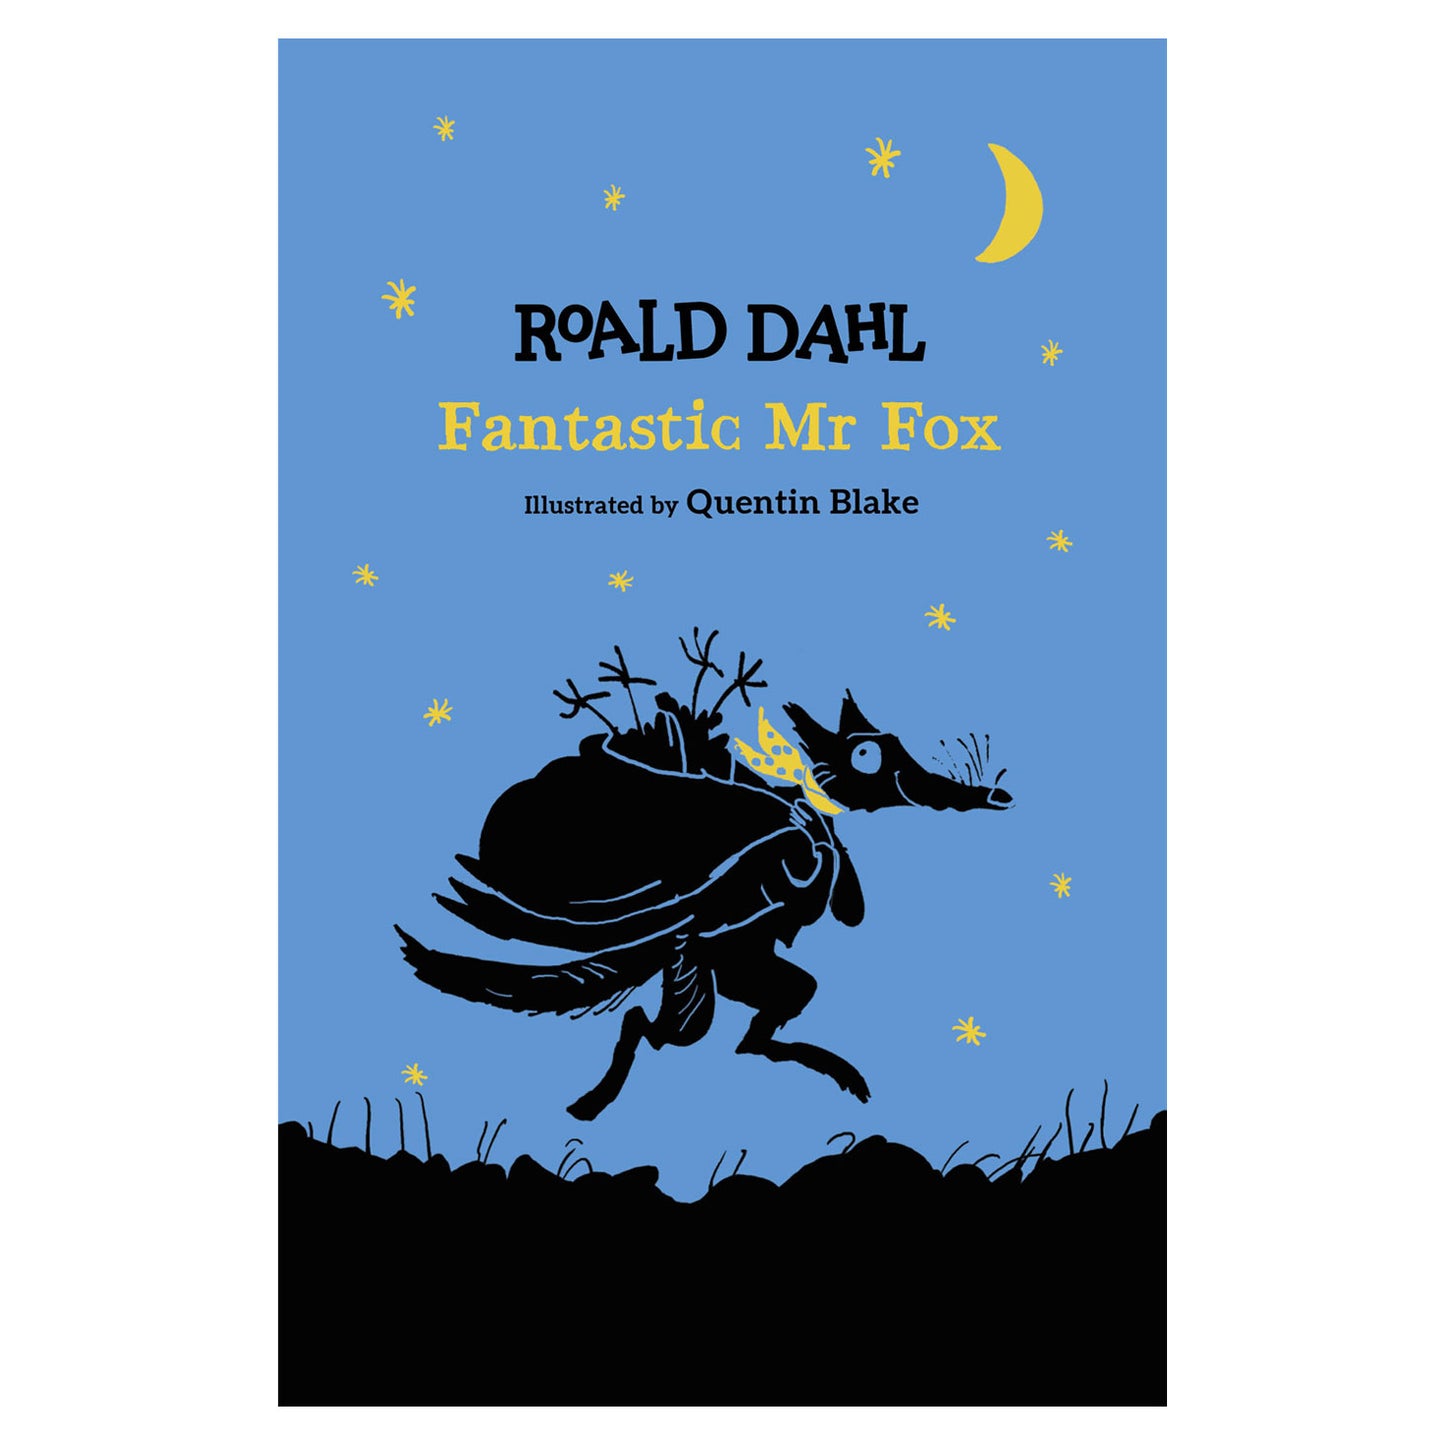 Museum exclusive edition of Fantastic Mr Fox by Roald Dahl with illustrations by Quentin Blake